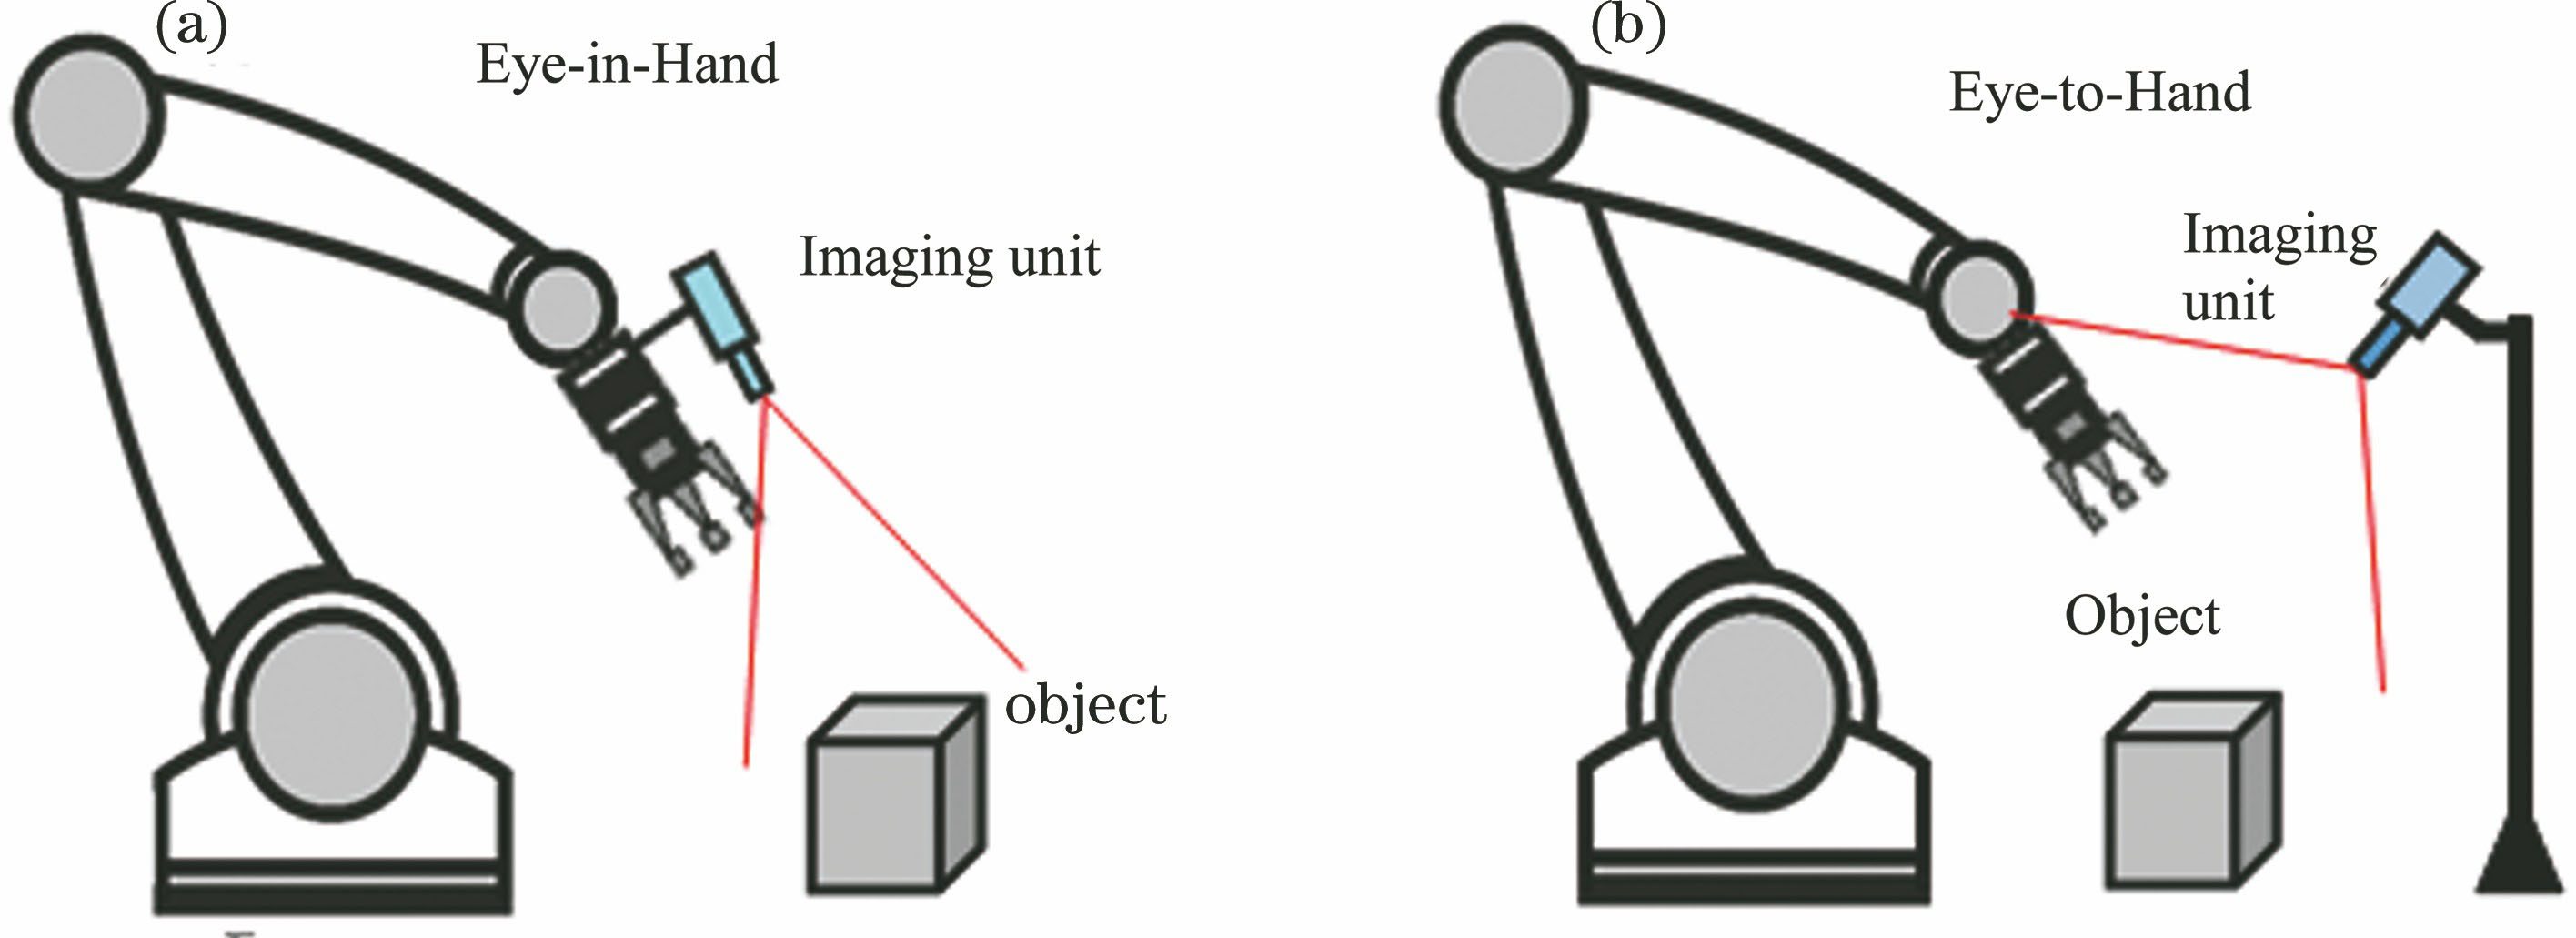 Configurations of two hand eye systems. (a) Eye-in-hand robotic system; (b) eye-to-hand robotic system